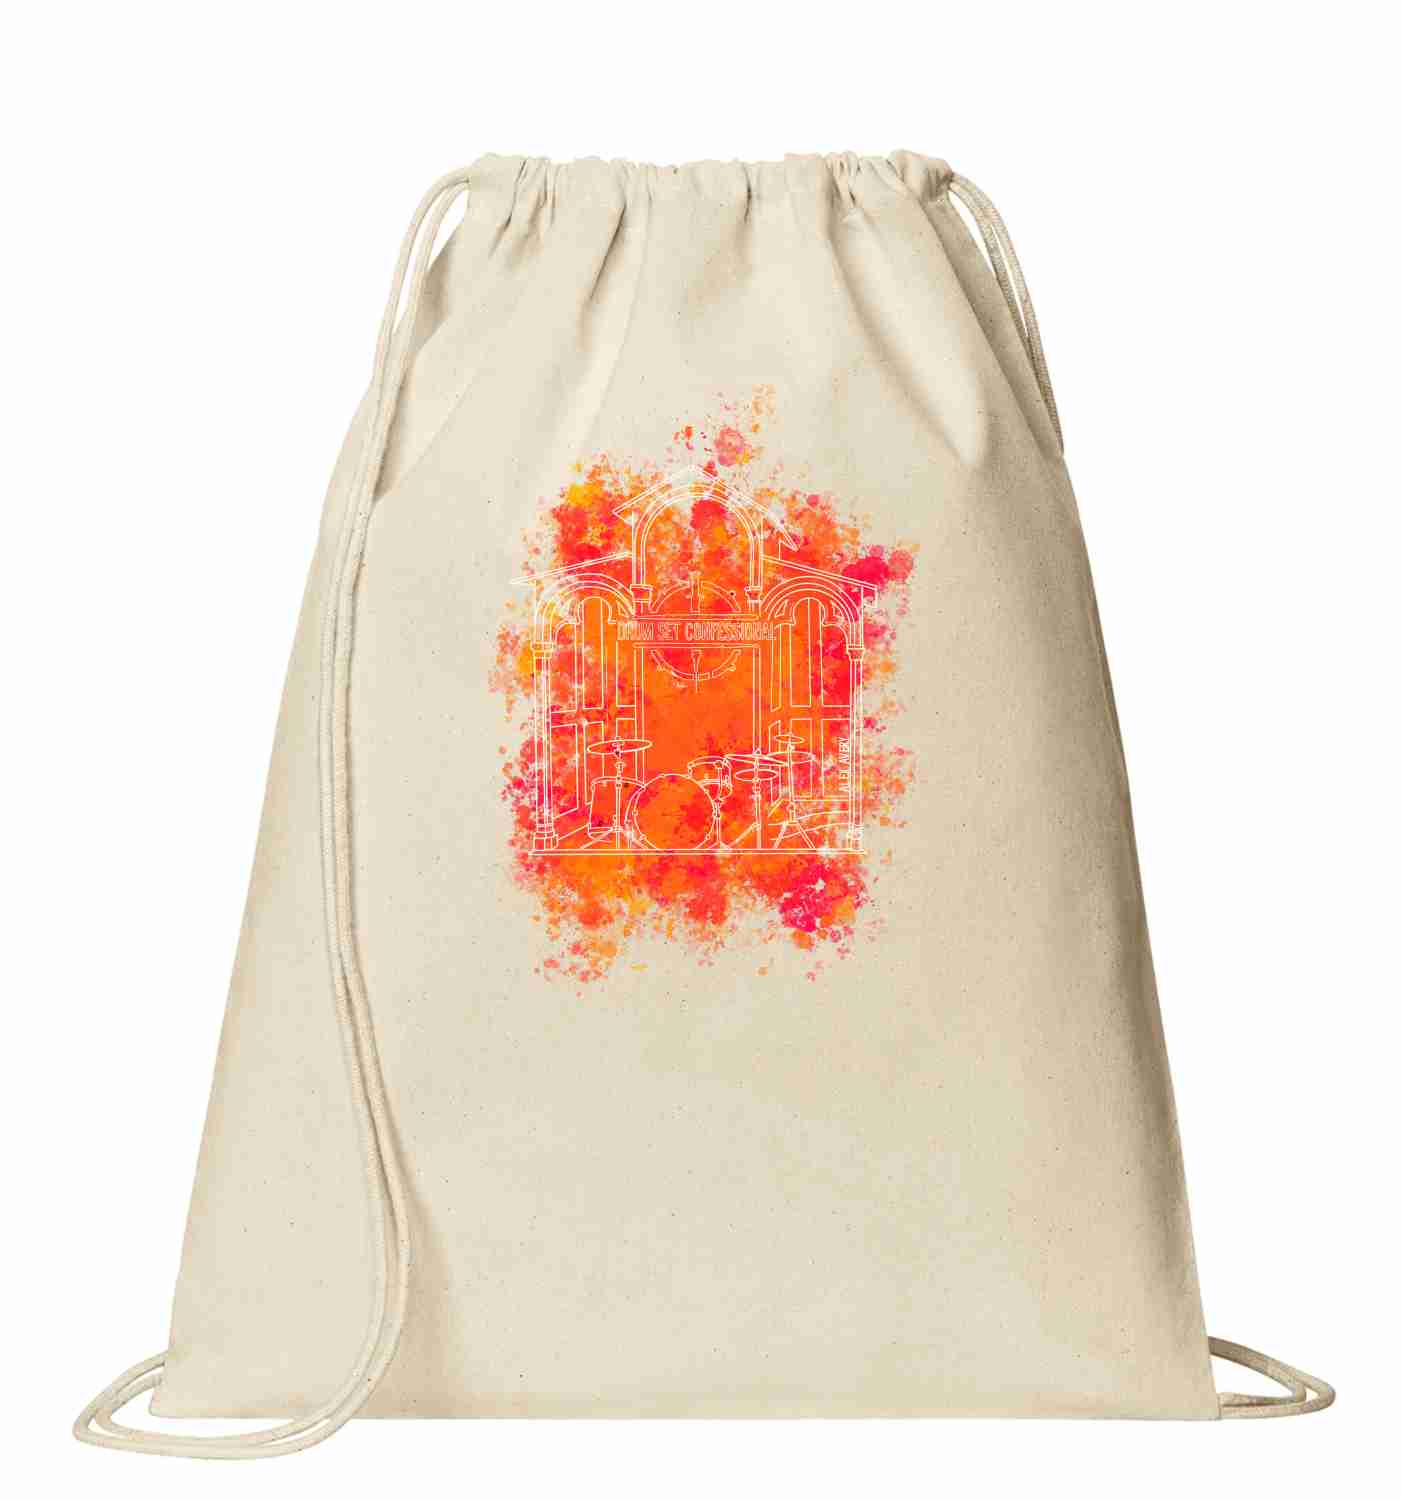 DSC "Confessional" Drawstring Bag/Backpack (100% of profits fuel outreach and donations to addiction/recovery causes.)